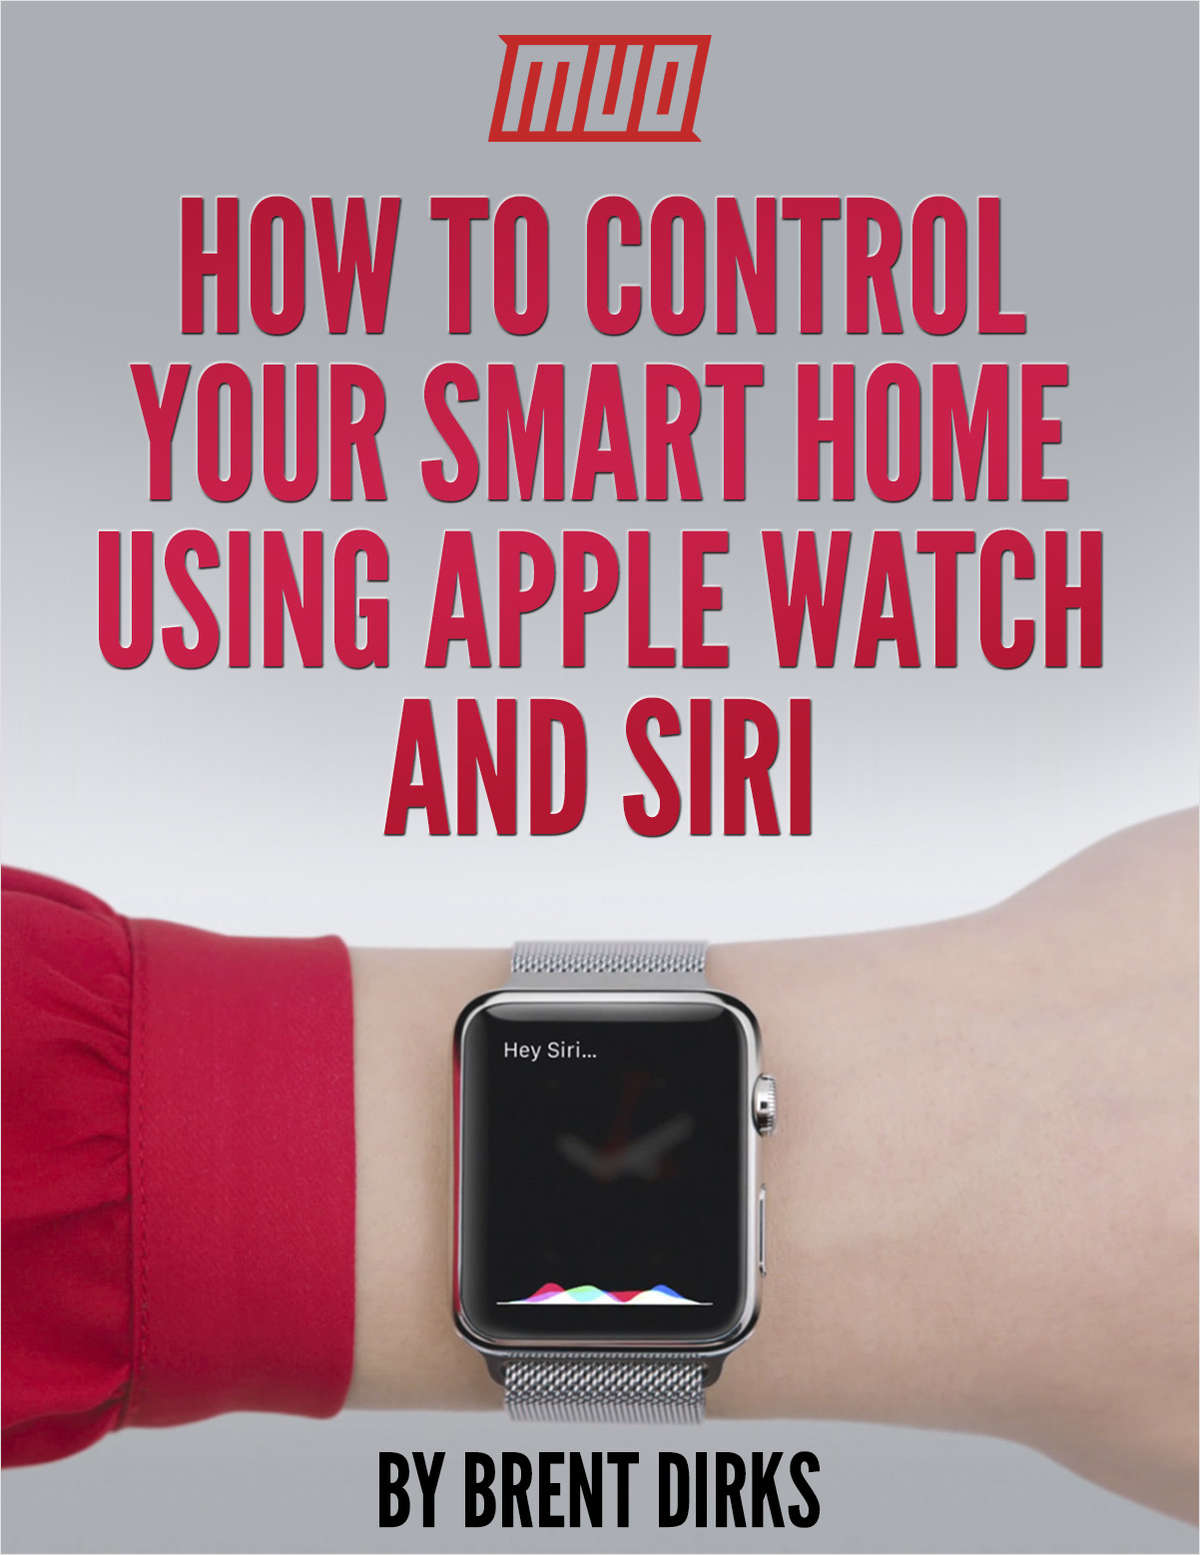 How to Control Your Smart Home Using Apple Watch and Siri